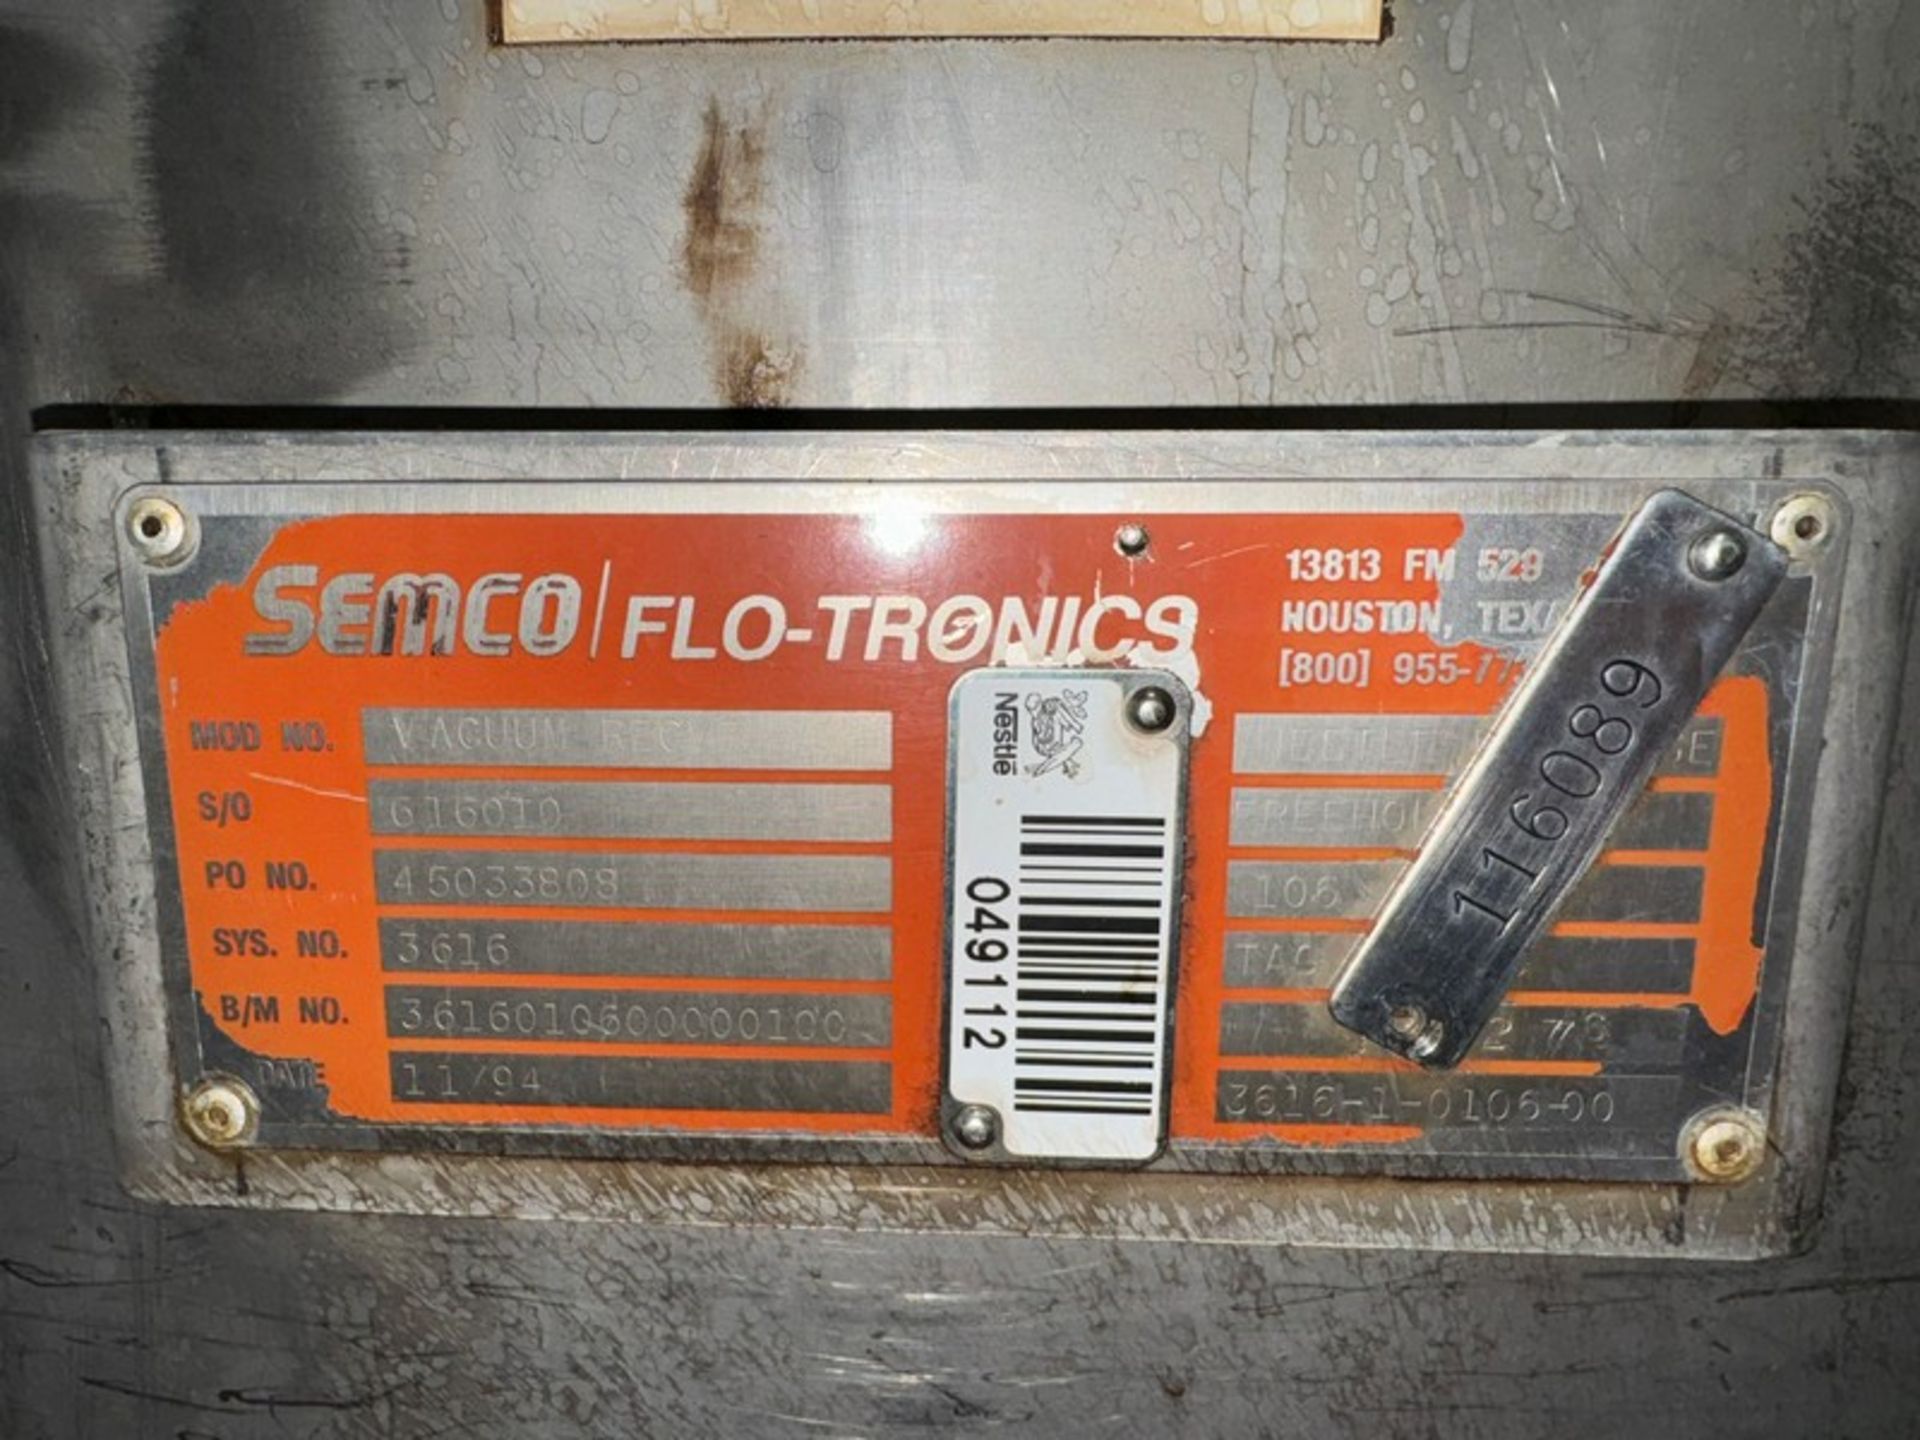 Semco Flo-Tronics S/S Vacuum Receiver, S/N 616010, System No. 3616 (N: 049112) (LOCATED IN FREEHOLD, - Image 3 of 4